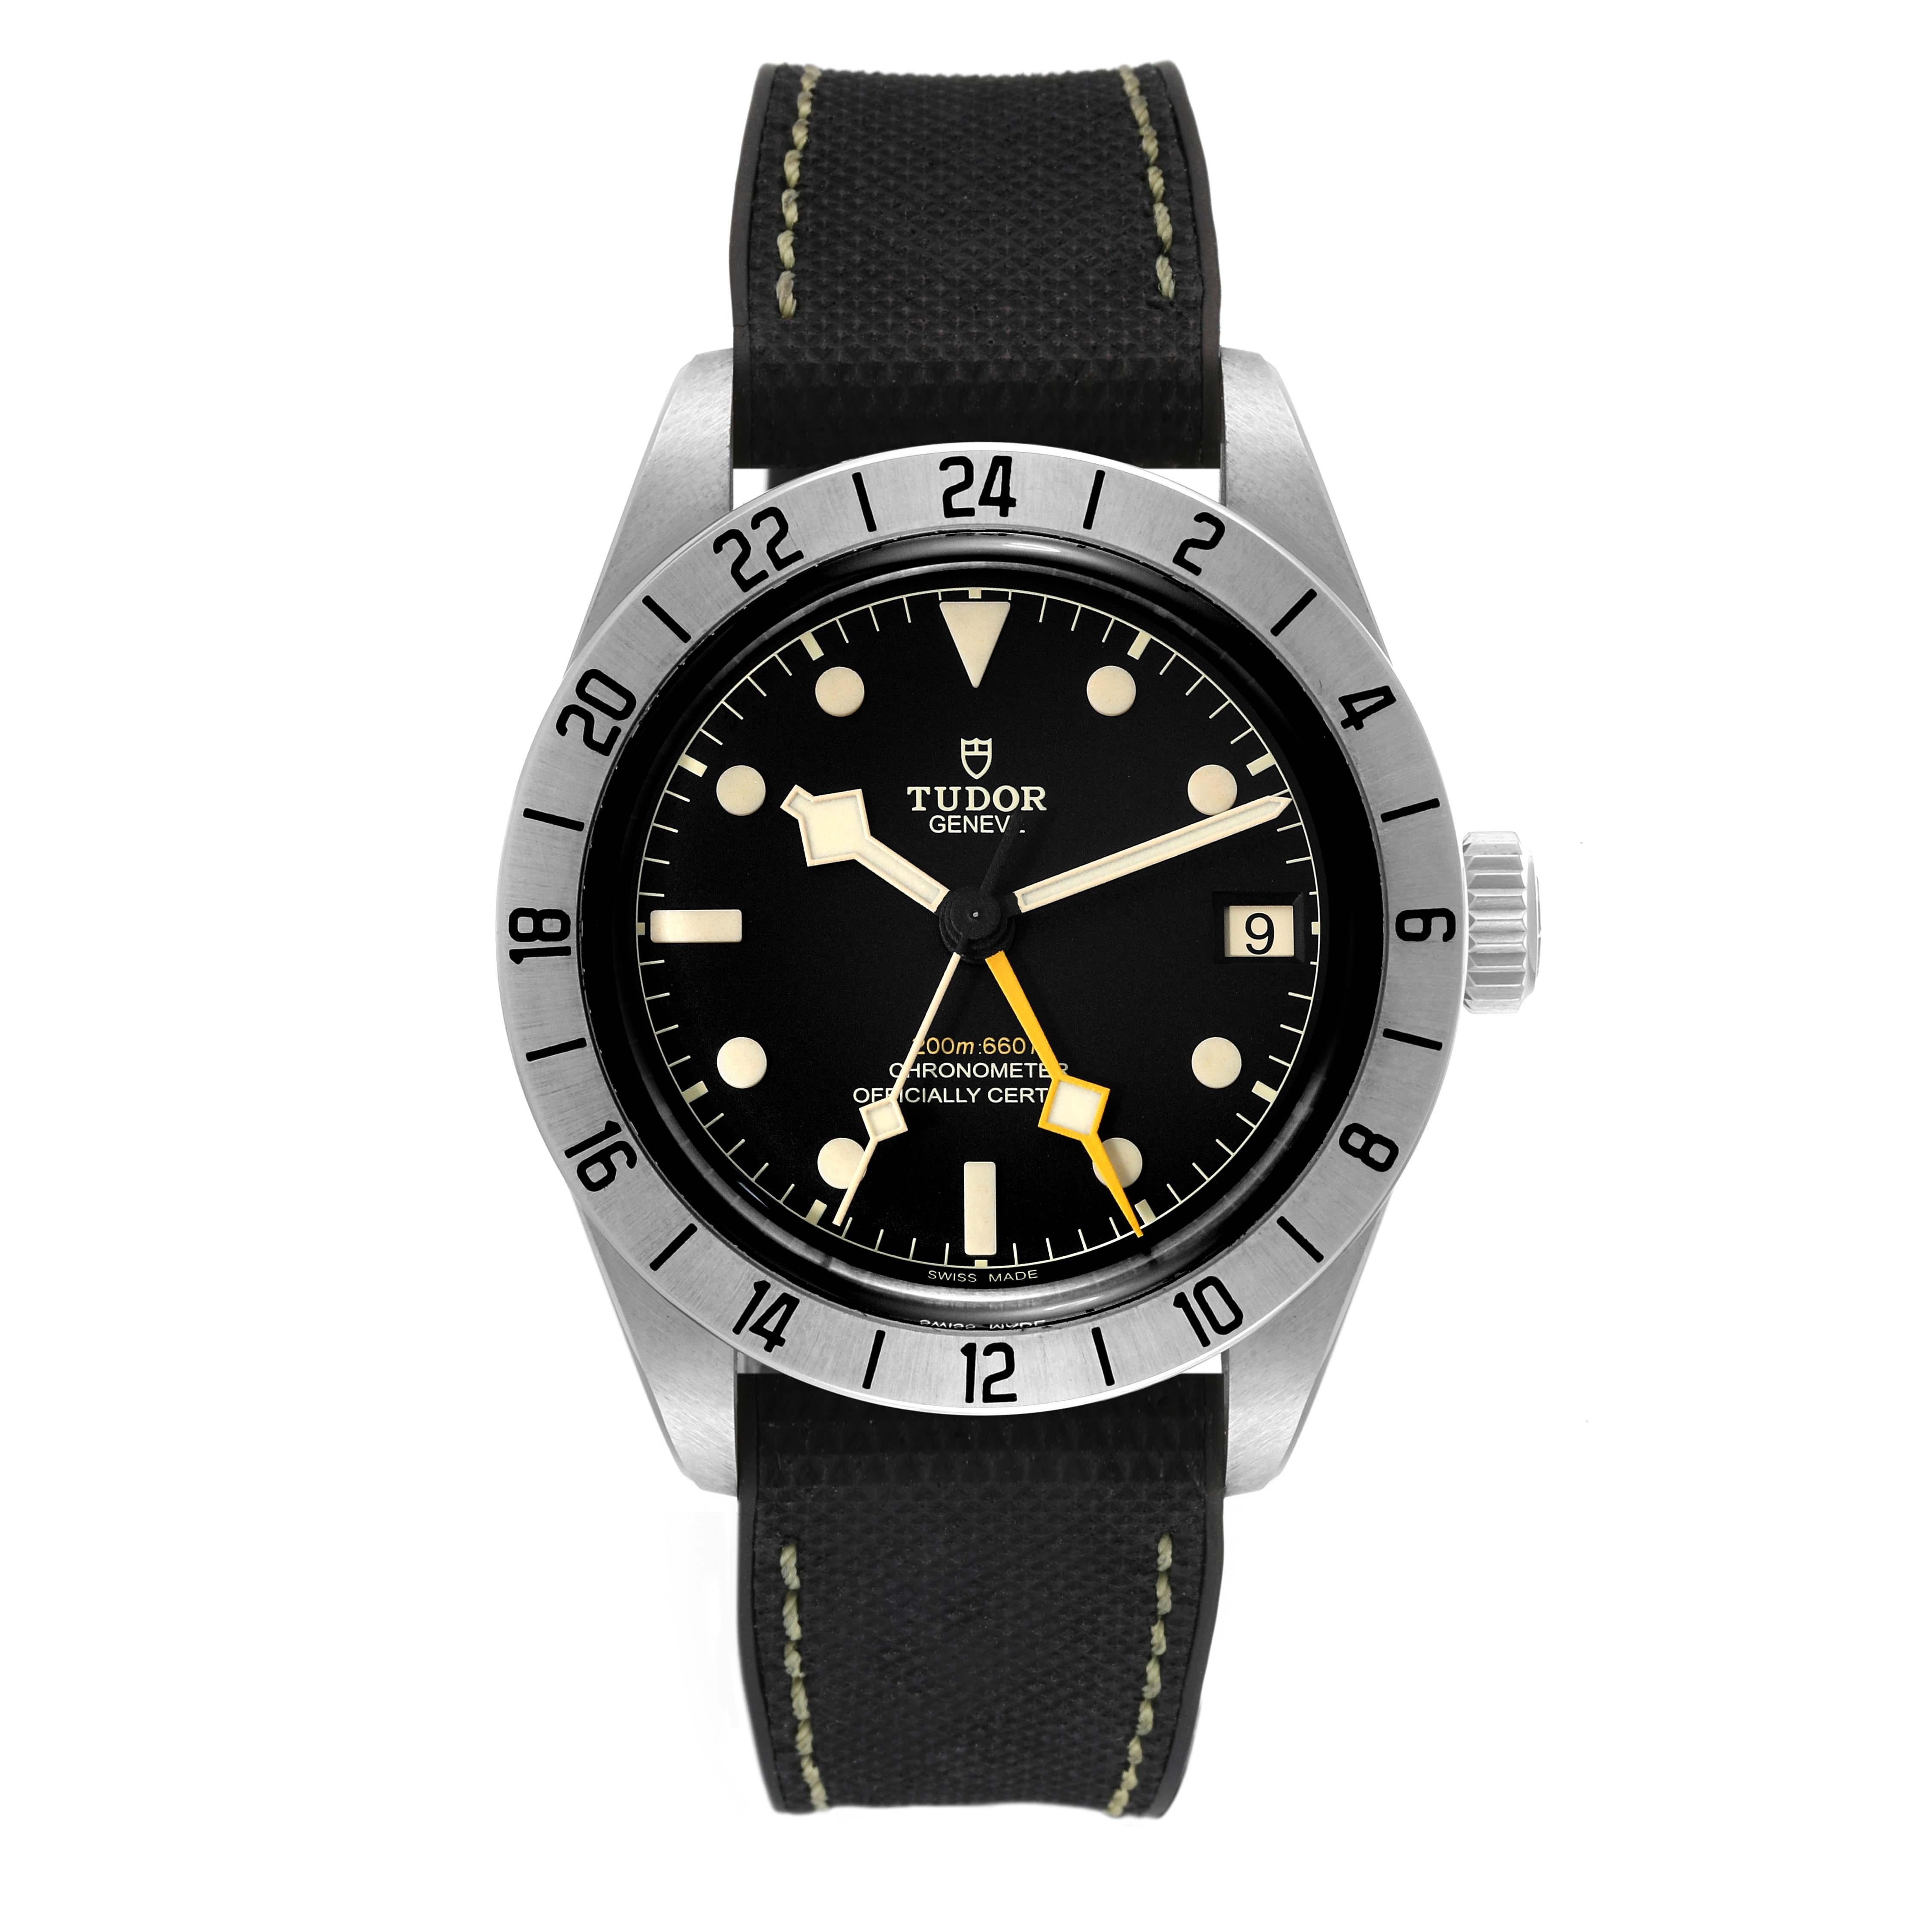 Tudor Black Bay Pro GMT Orange Hand Steel Mens Watch M79470 Unworn. Automatic self-winding movement. Stainless steel case 39.0 mm in diameter. Tudor logo on the crown. Stainless steel 24 hour graduated bezel with satin finish. Scratch resistant